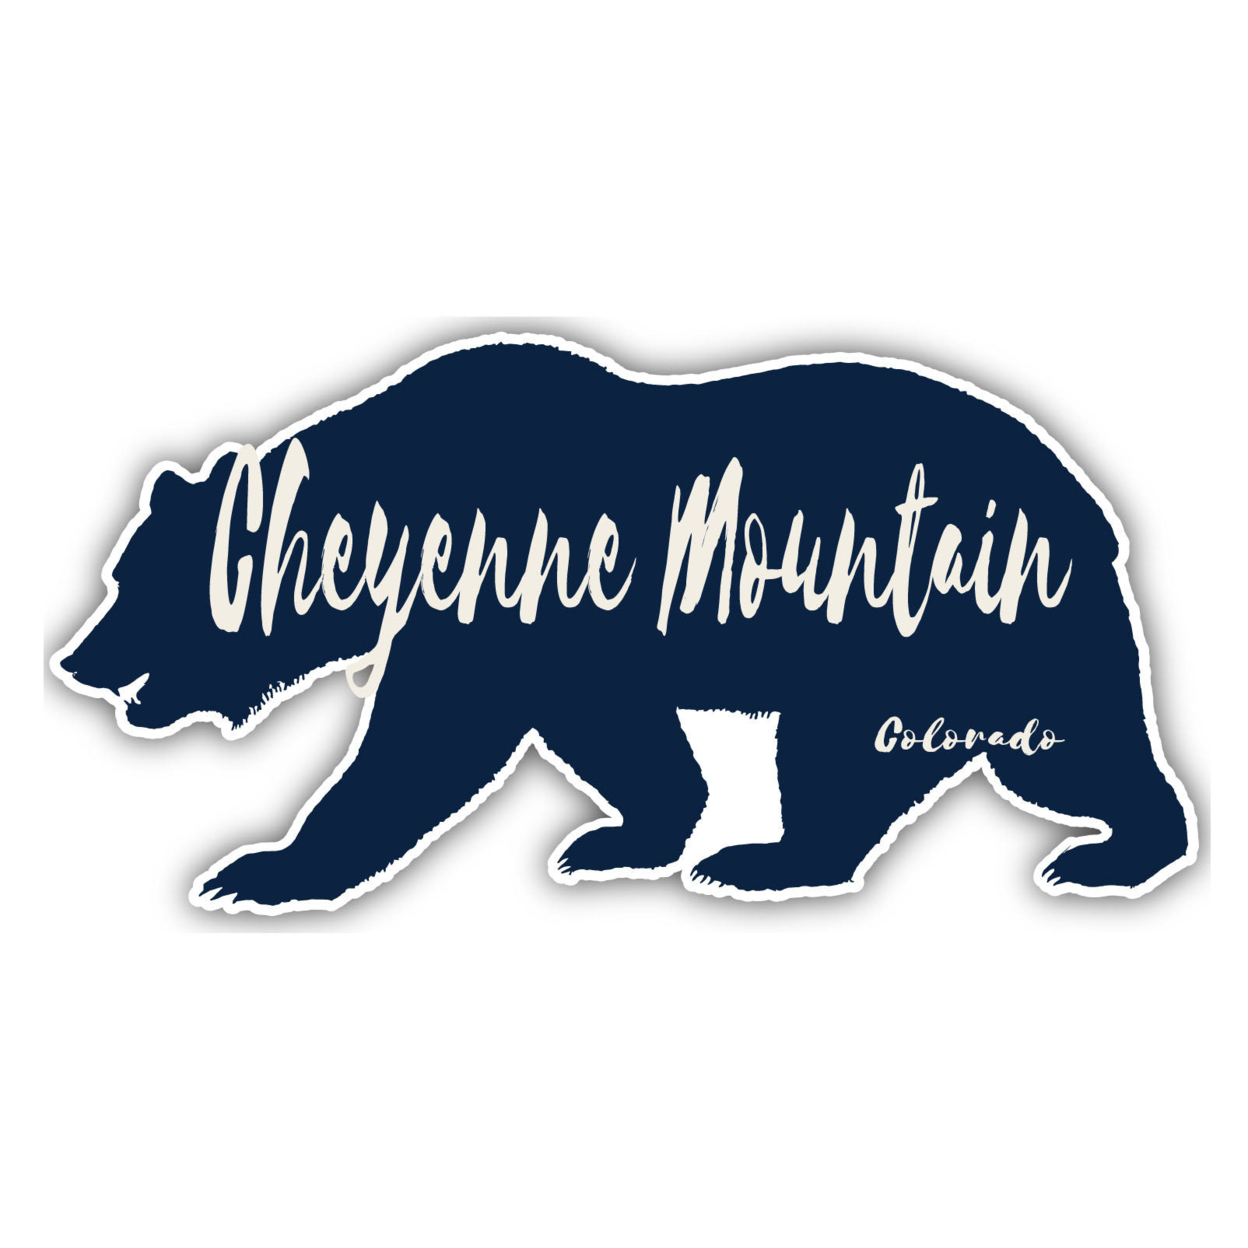 Cheyenne Mountain Colorado Souvenir Decorative Stickers (Choose Theme And Size) - 4-Pack, 4-Inch, Camp Life